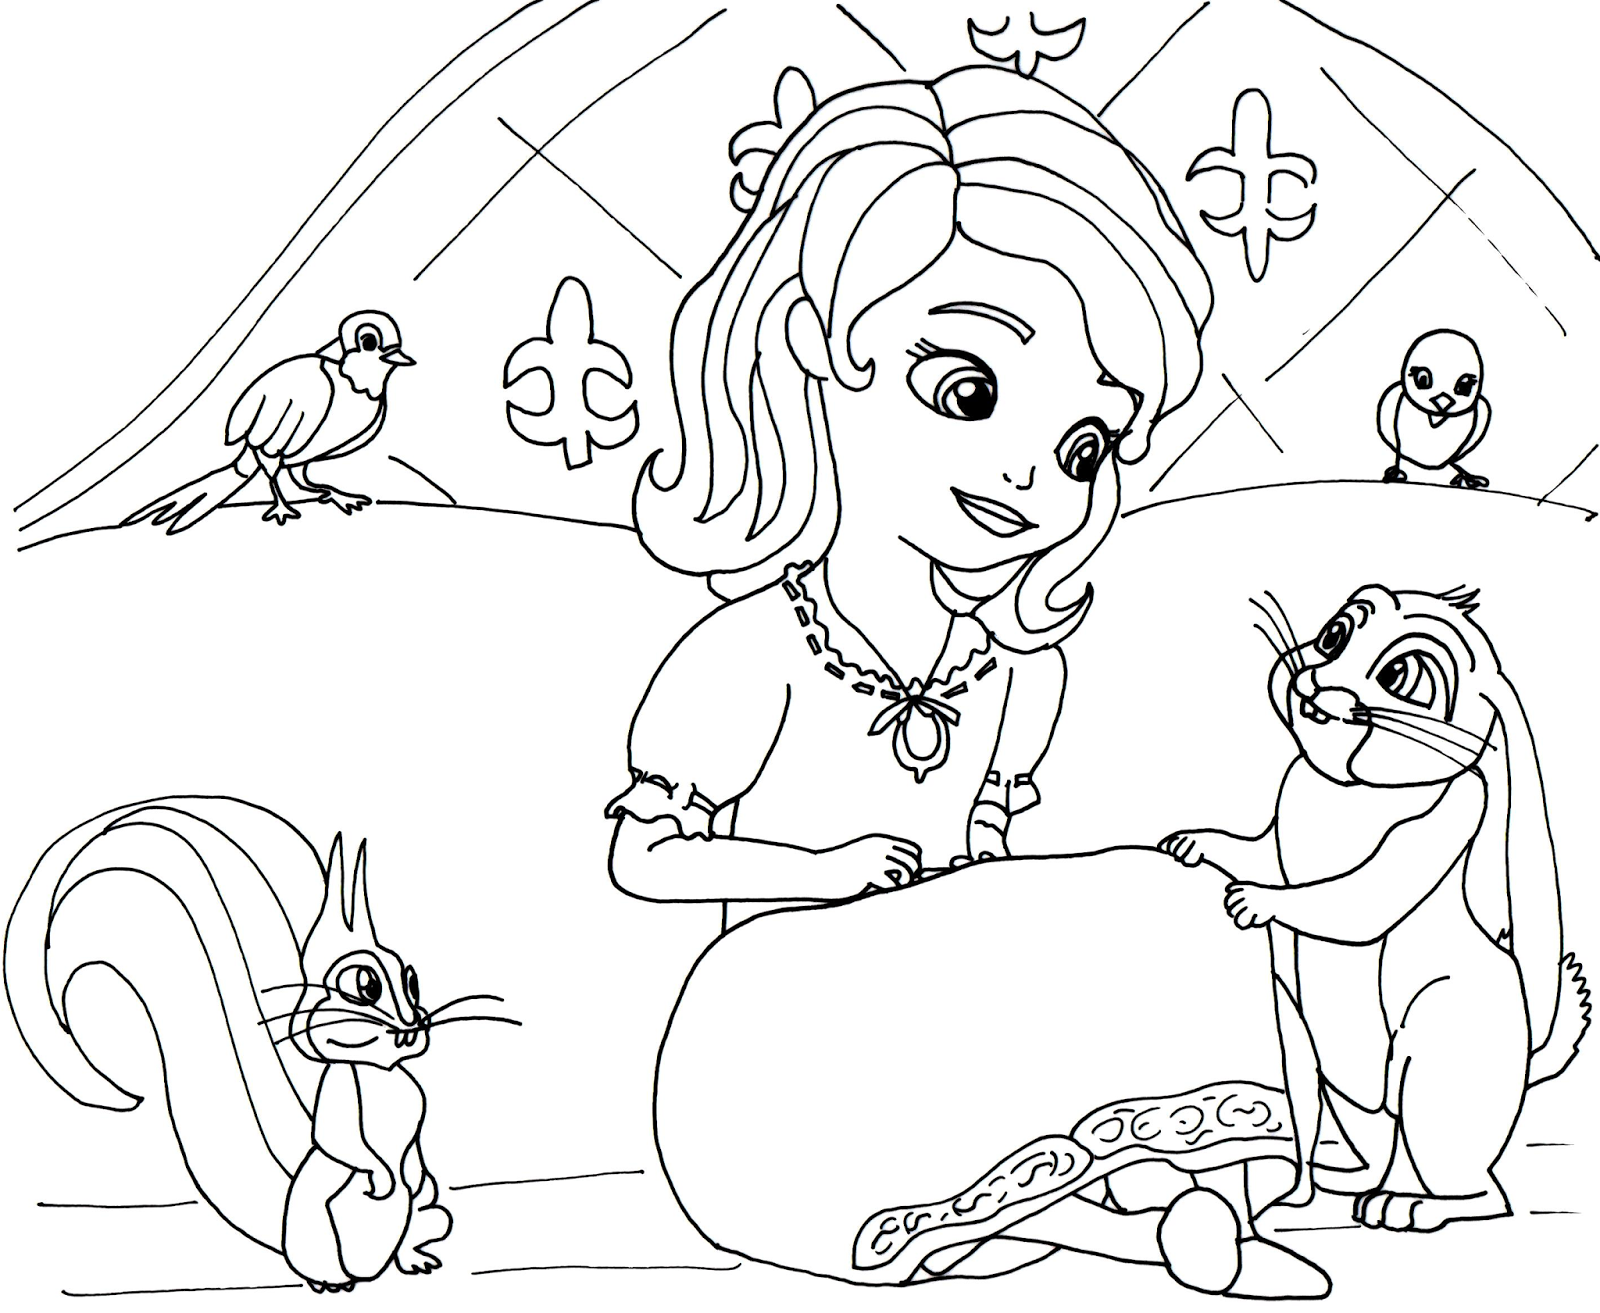 Sofia The First Coloring Pages Sofia The First Coloring Page With Robin Mia Clover And Whatnaught 